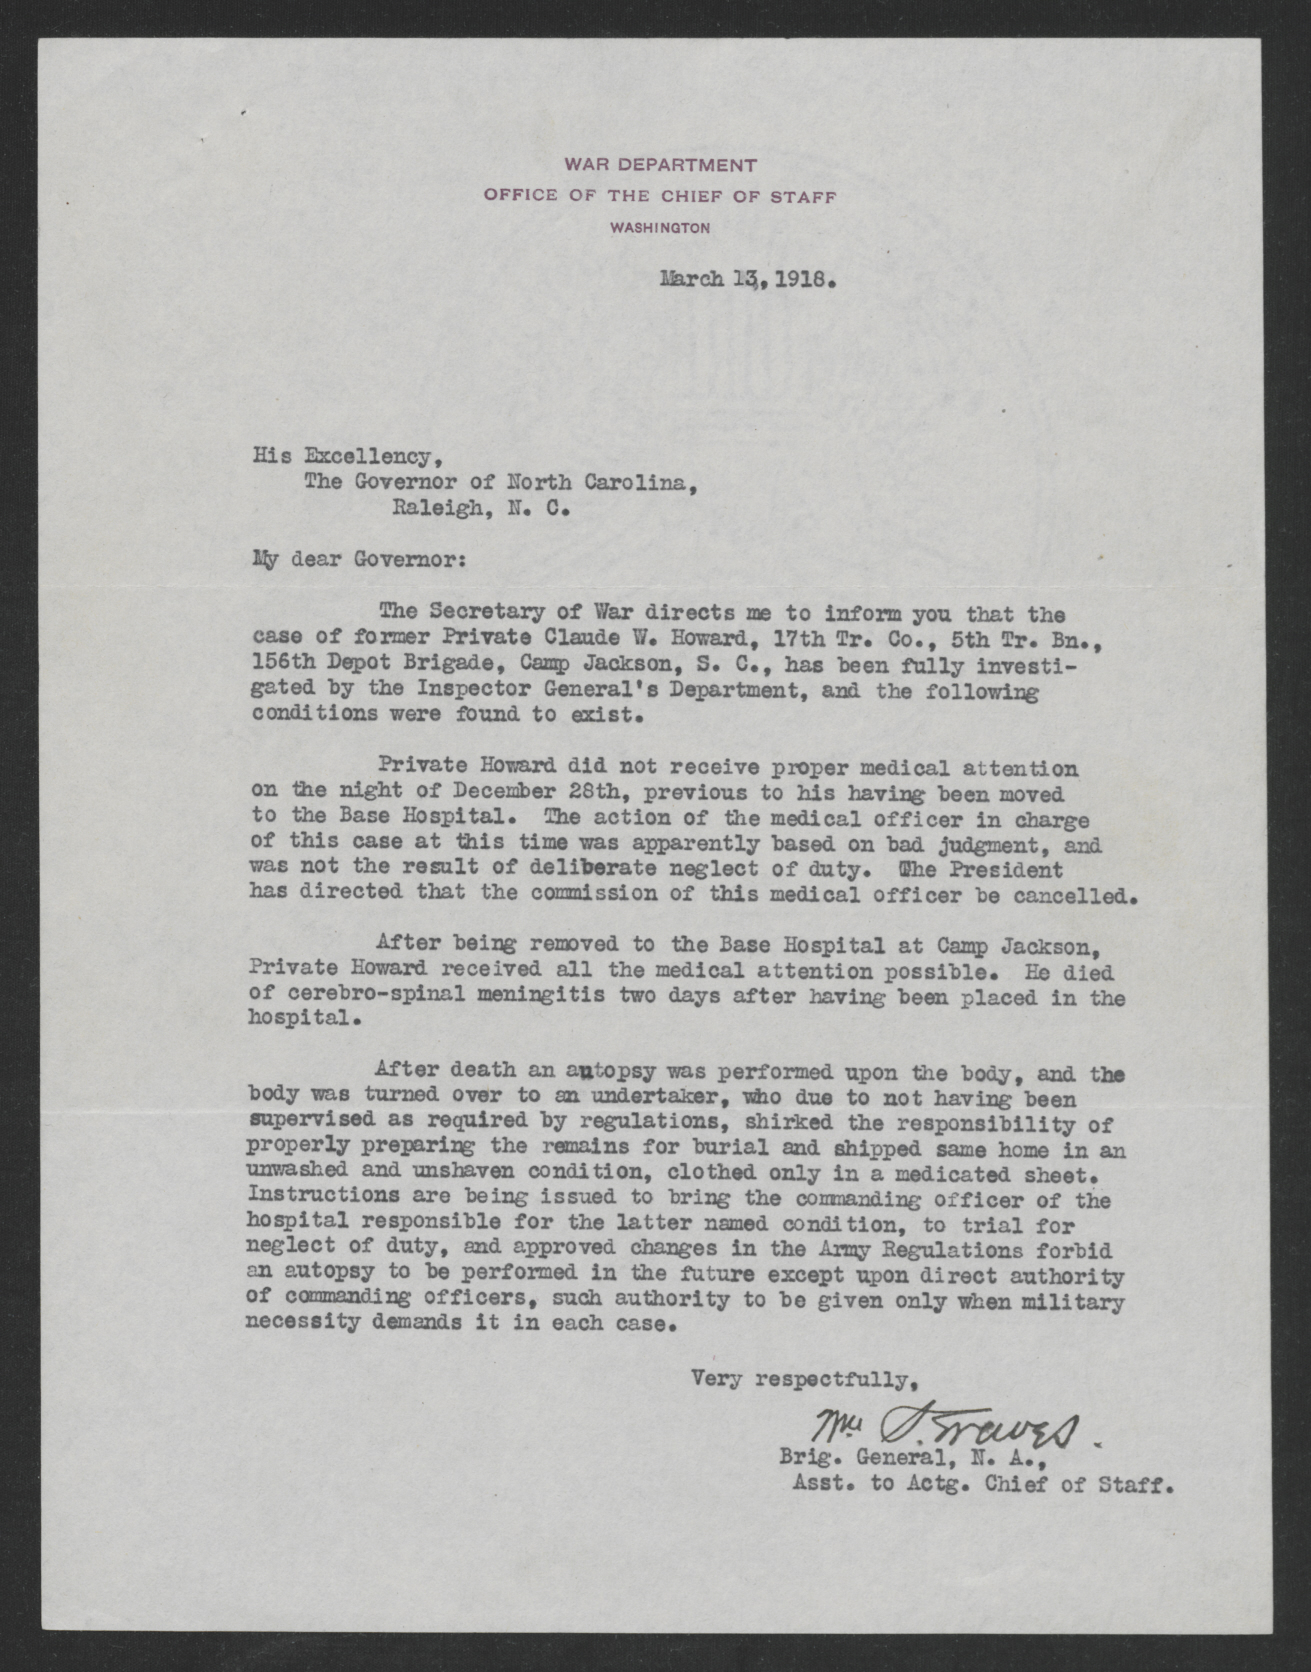 Letter from William S. Graves to Thomas W. Bickett, March 13, 1918